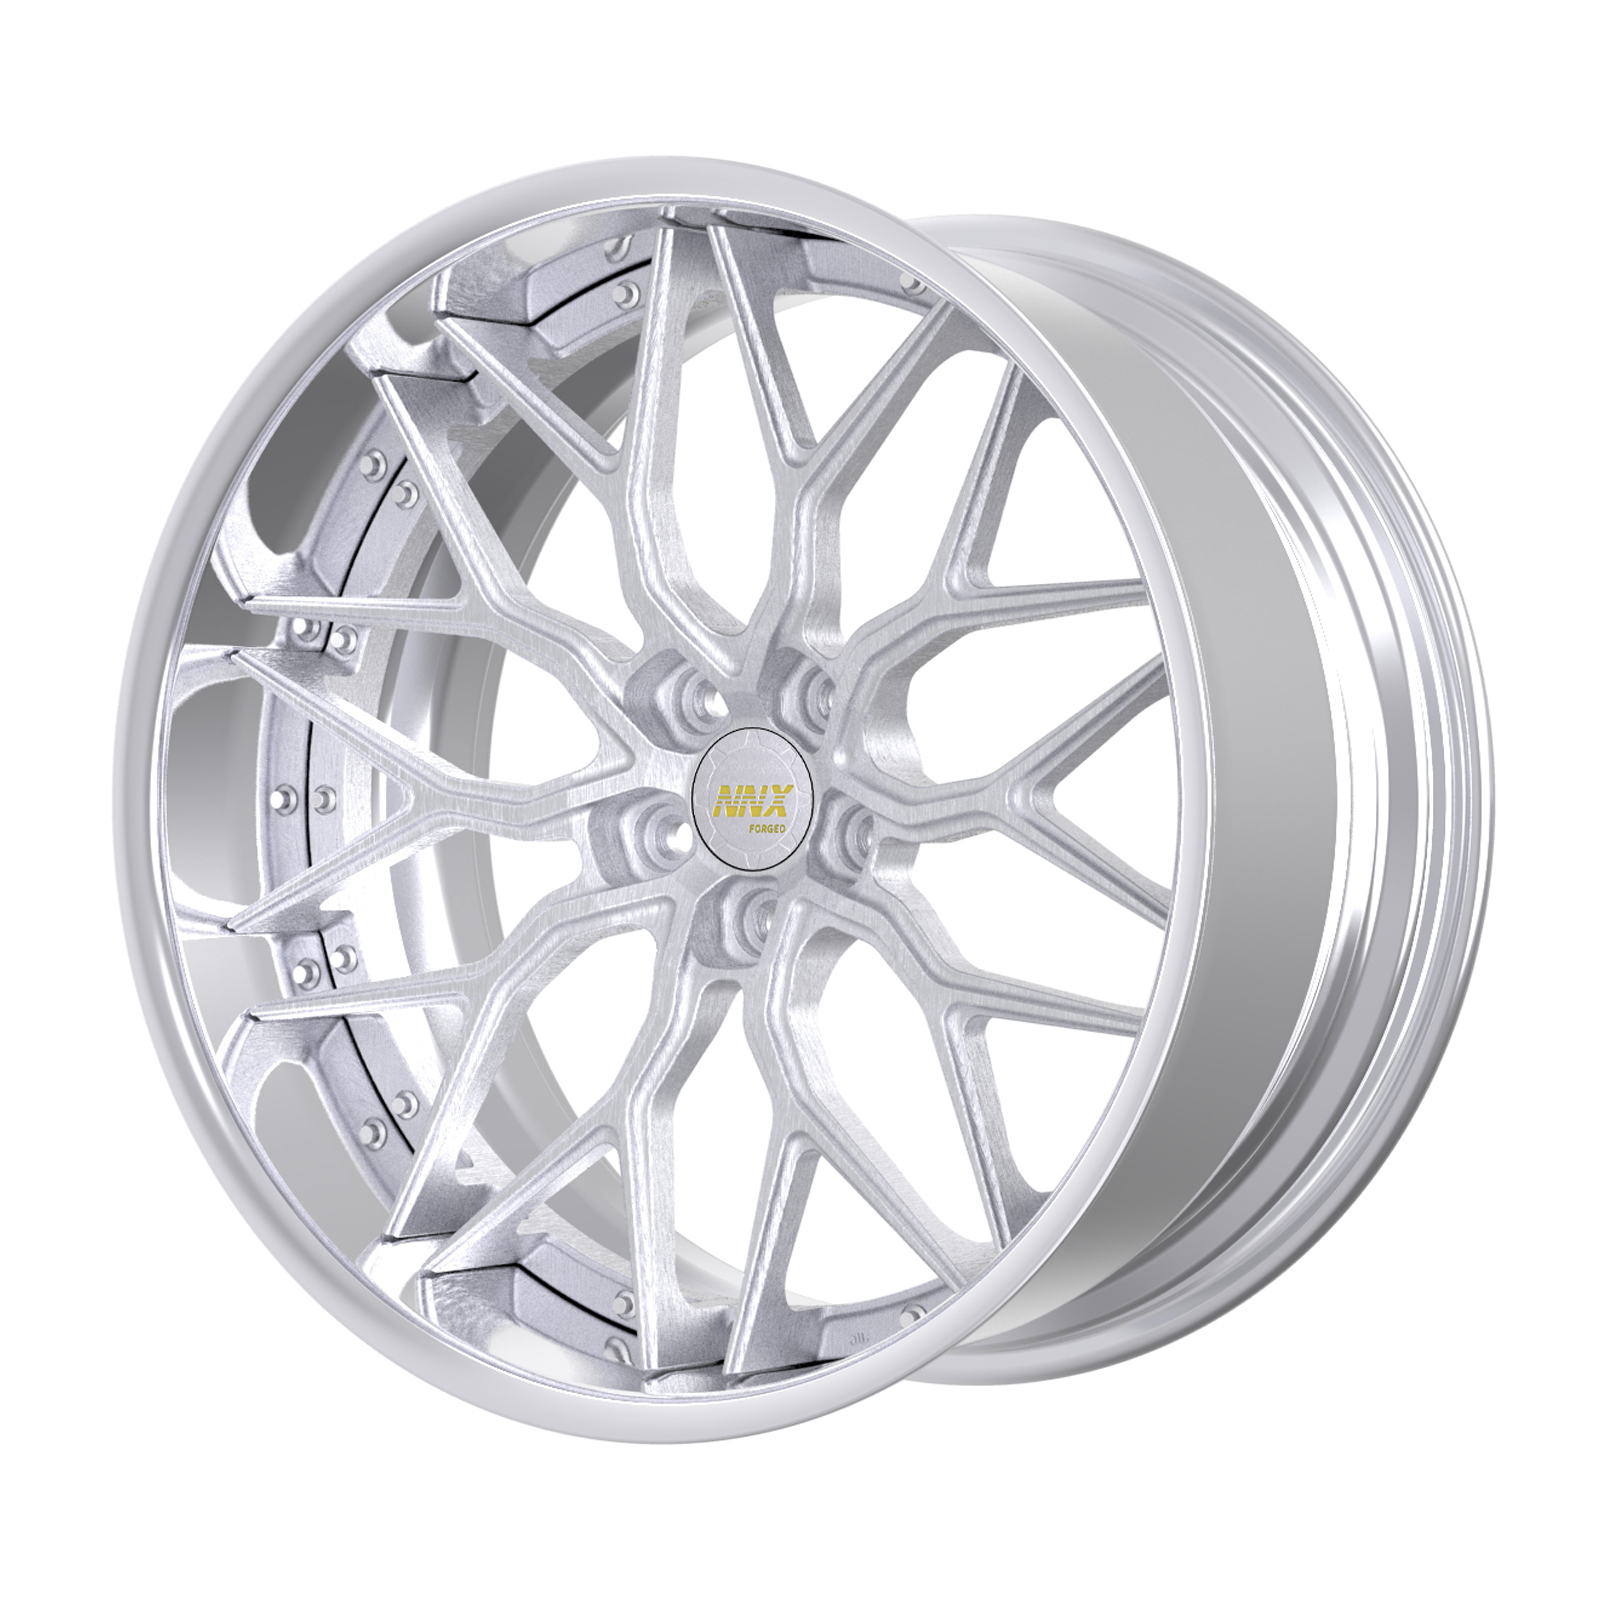 NNX-S129   New designs aluminum 5x120 5x114.3 5x112 18 19 20 21 22inch forged wheels,18 19  20 21 22 inch alloy always in stock